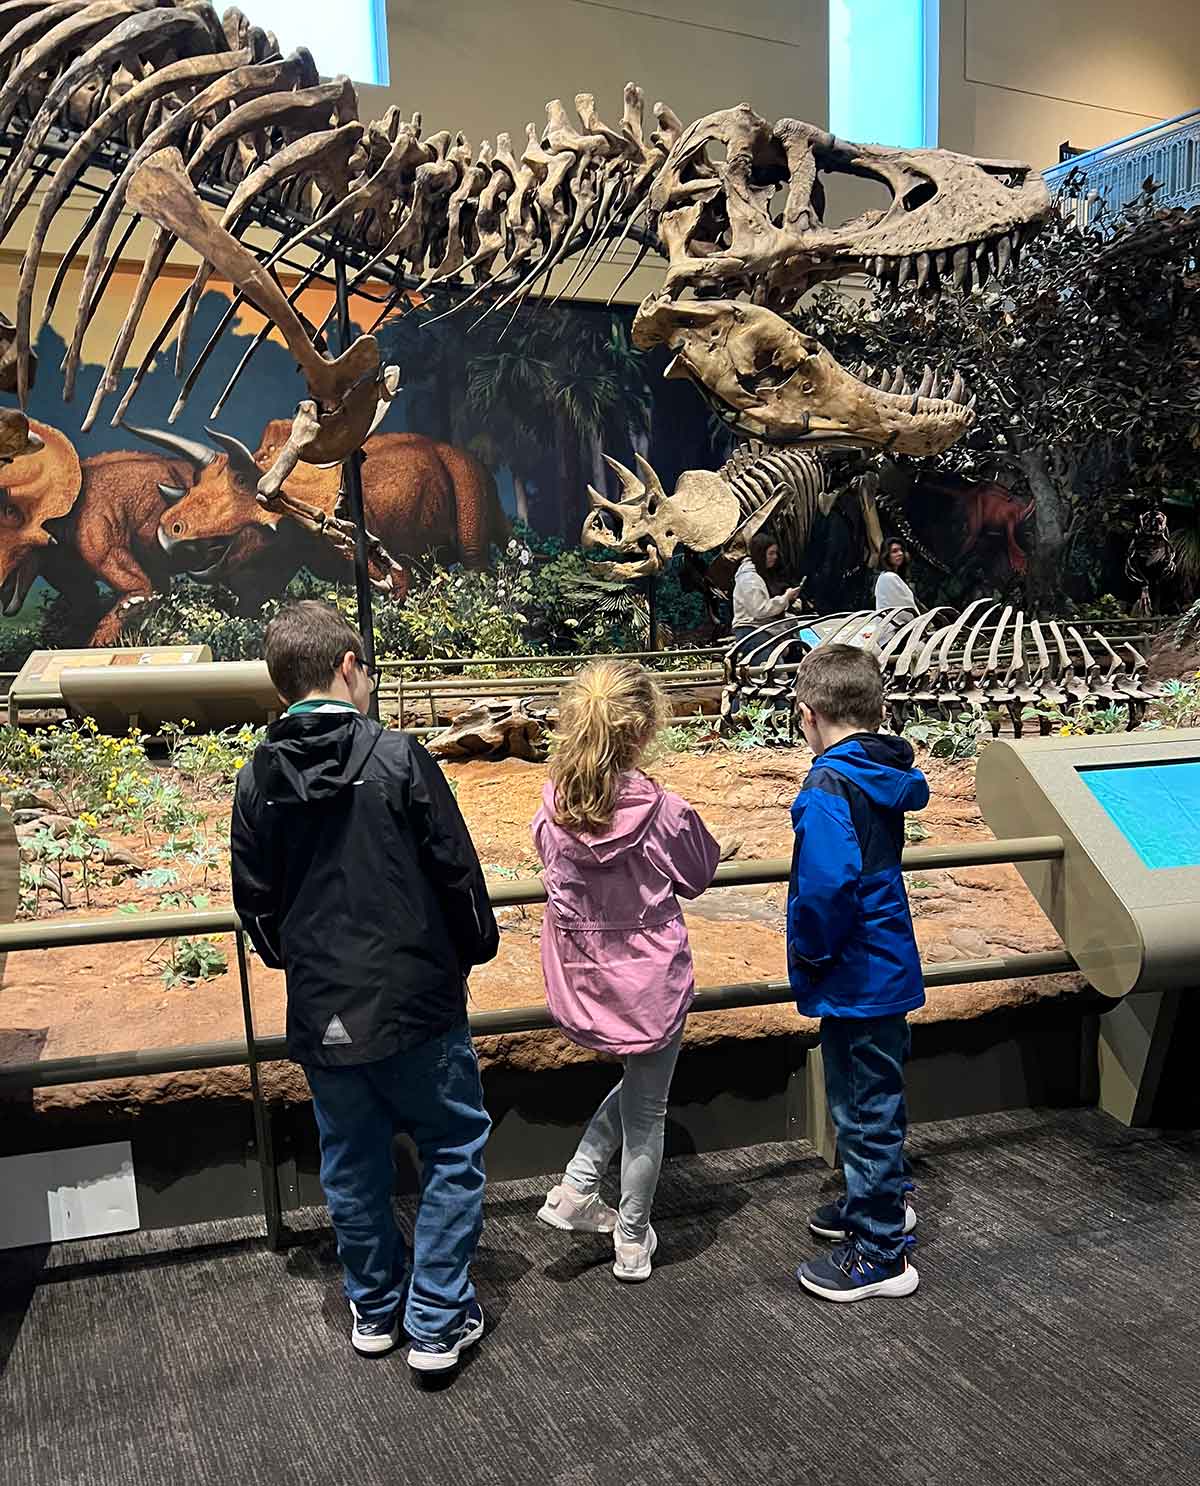 Three children standing in front of a dinosaur exhibit at a museum.